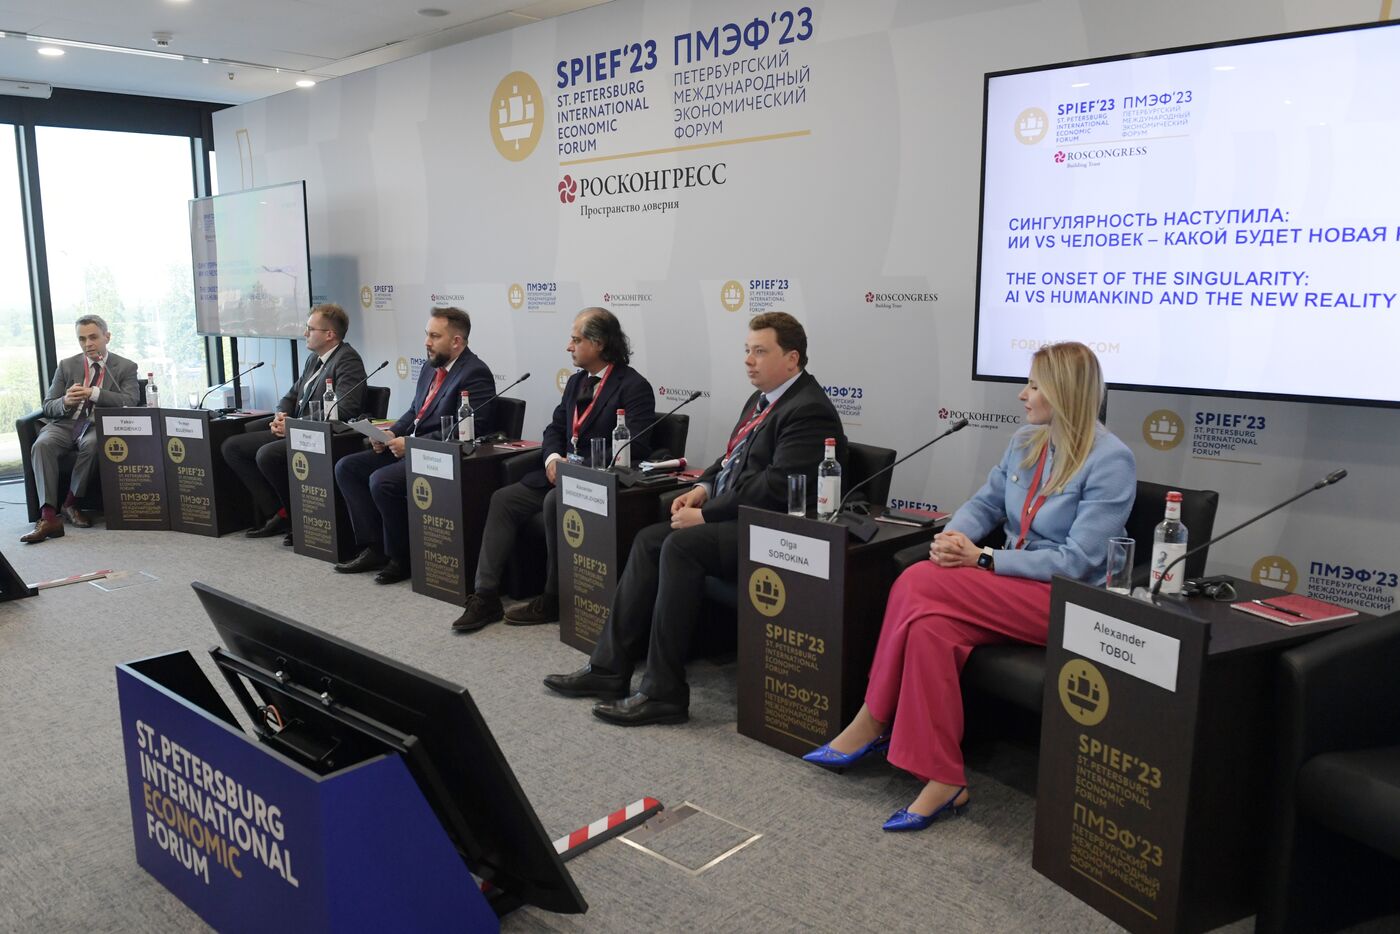 SPIEF-2023. The Onset of the Singularity: AI vs Humankind and the New Reality